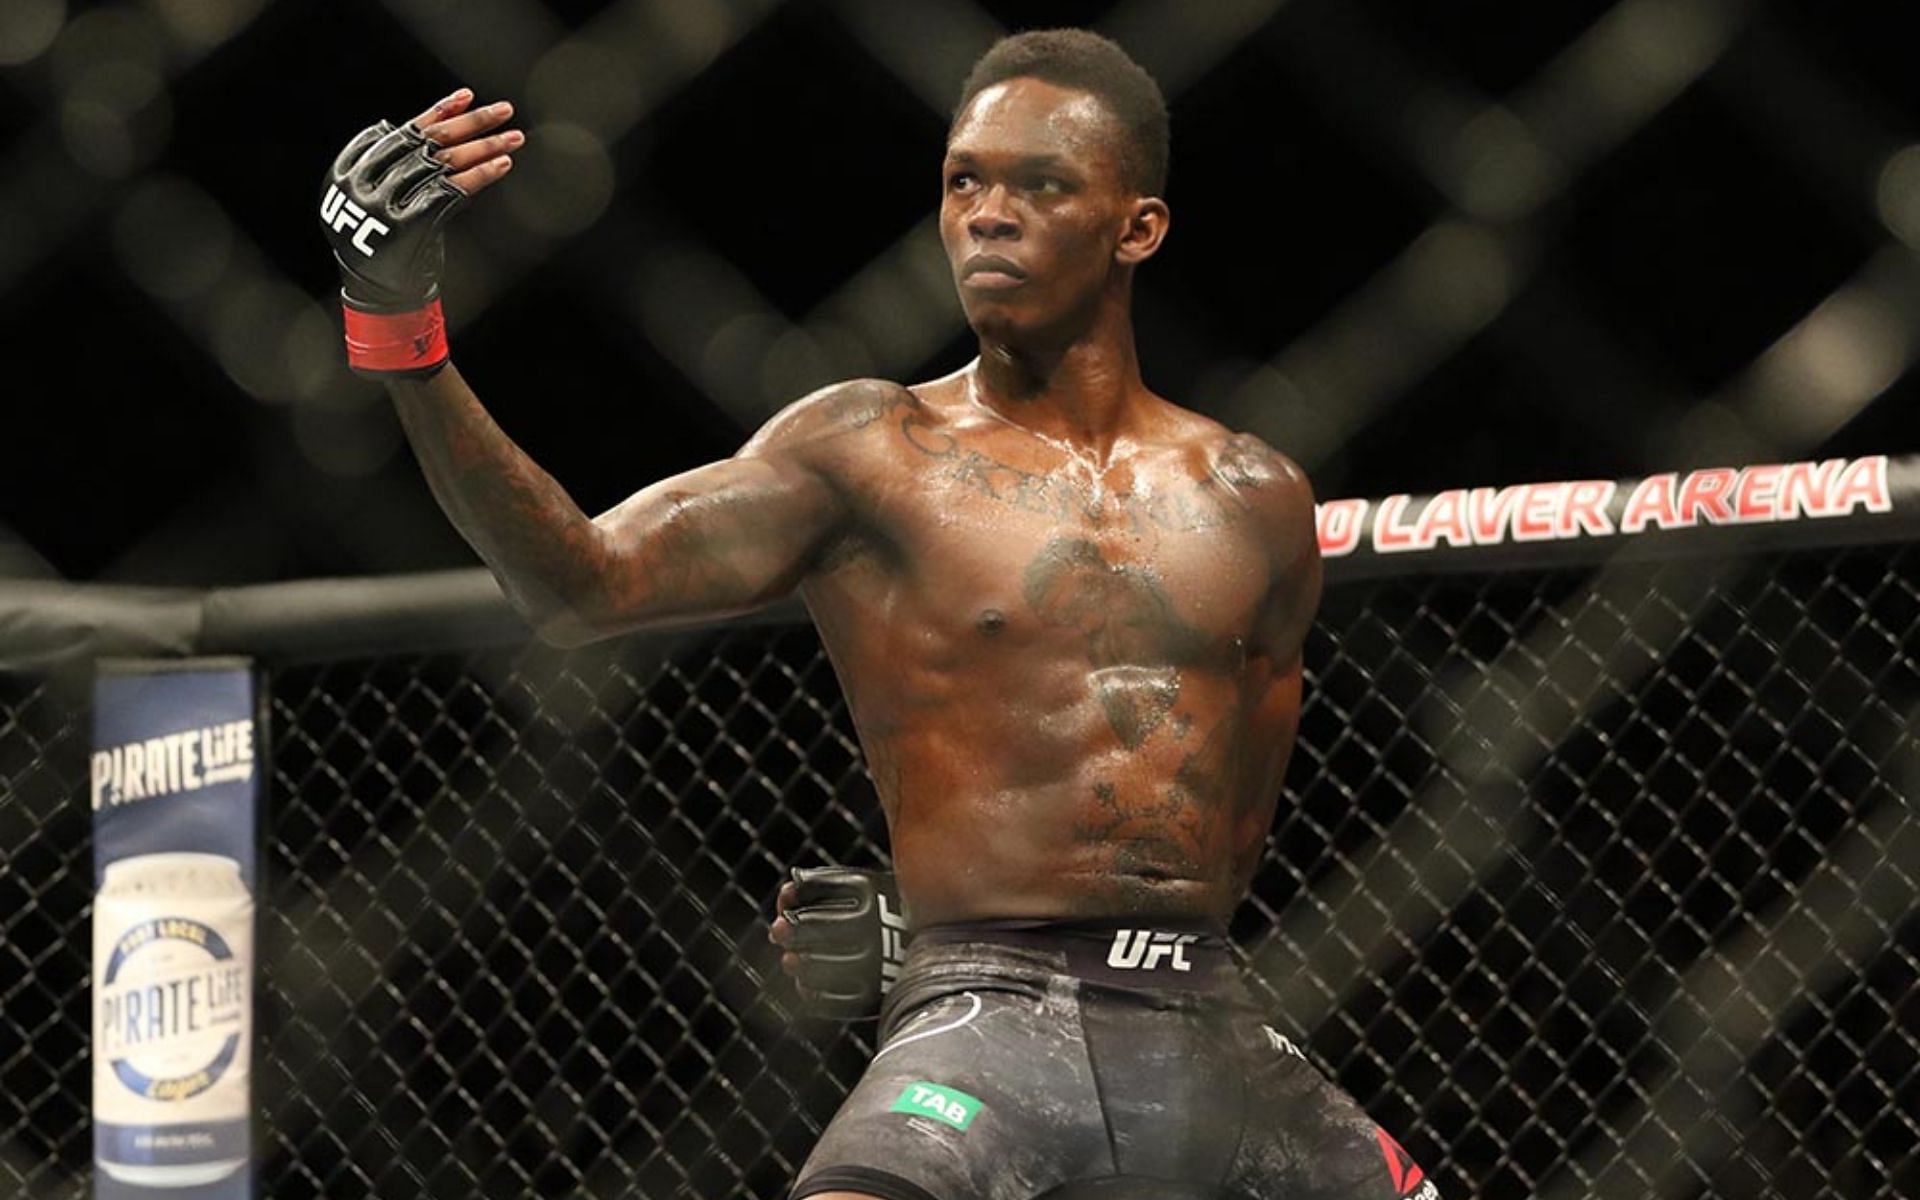 Australia and New Zealand have produced a number of legendary UFC fighters, including Israel Adesanya